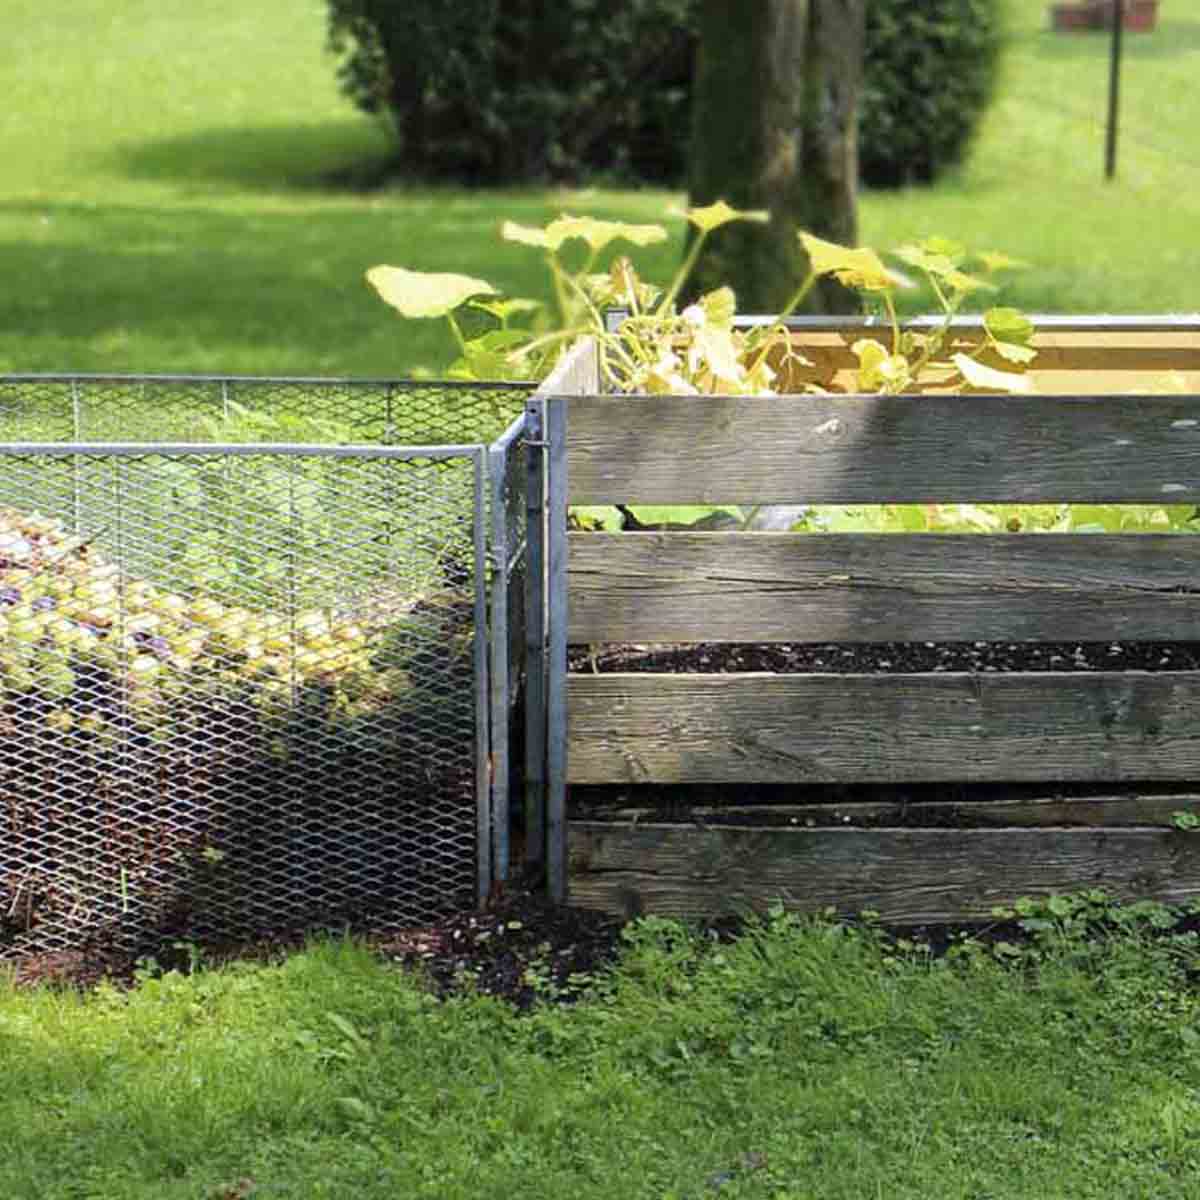 Example of composting bin system.